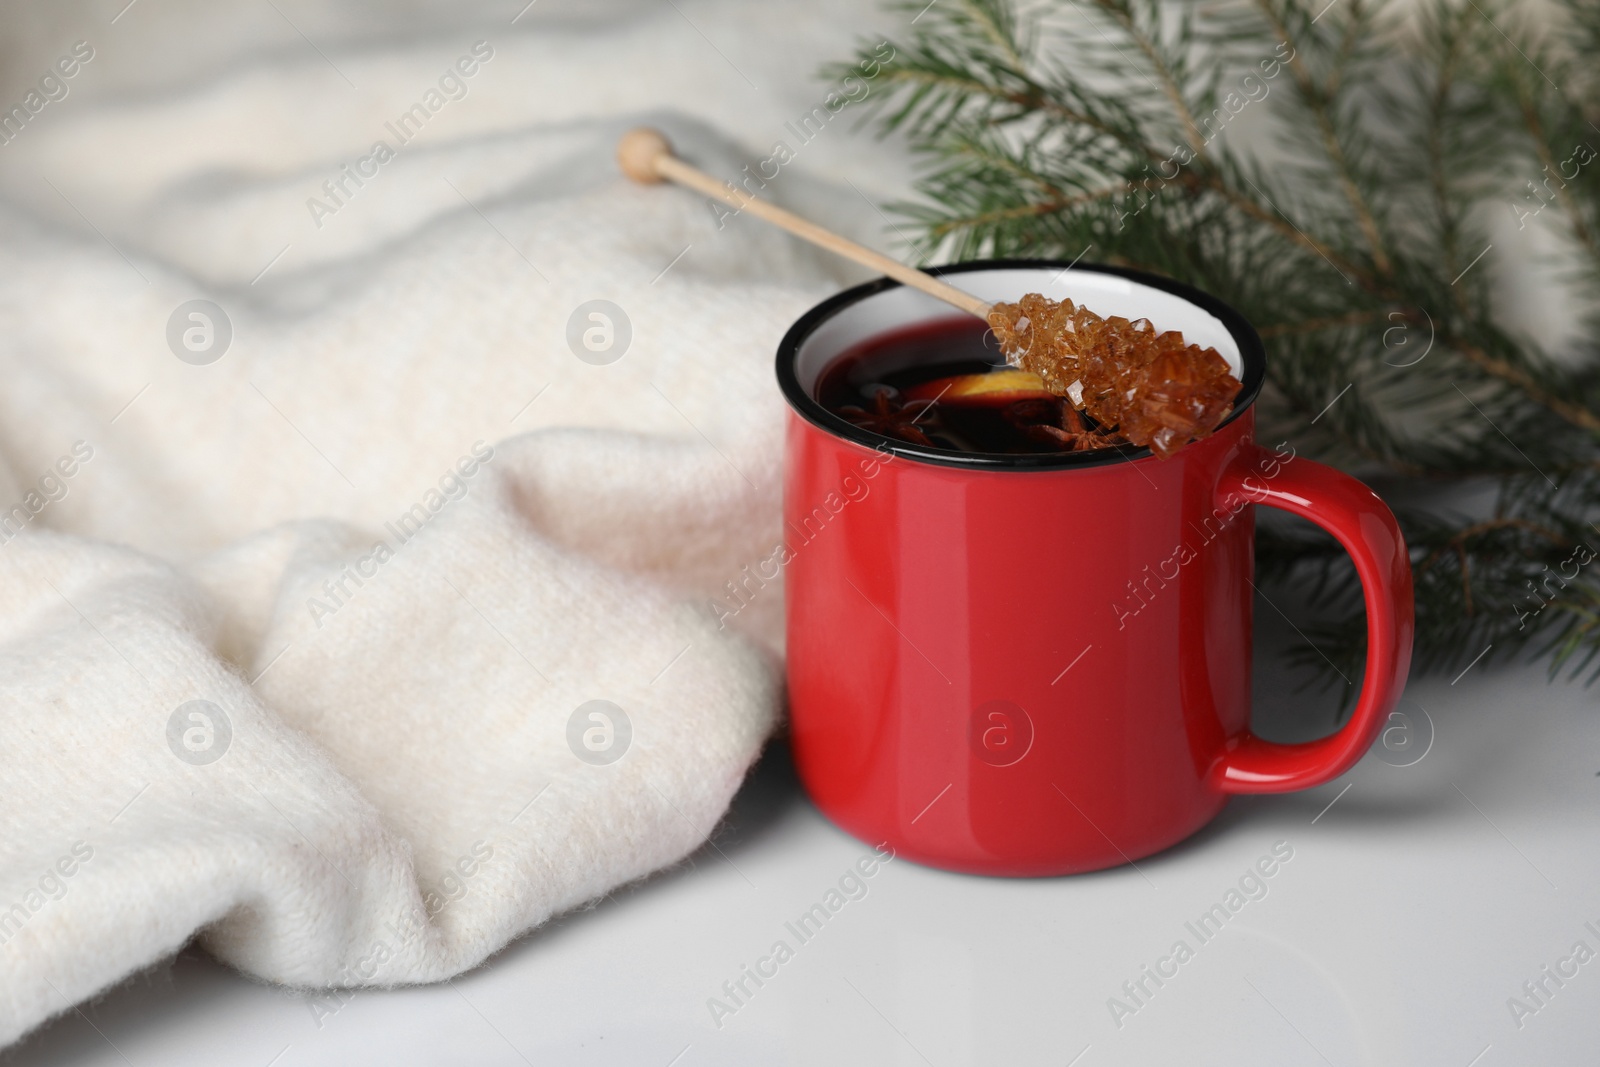 Photo of Stick with sugar crystals and cup of drink on white table